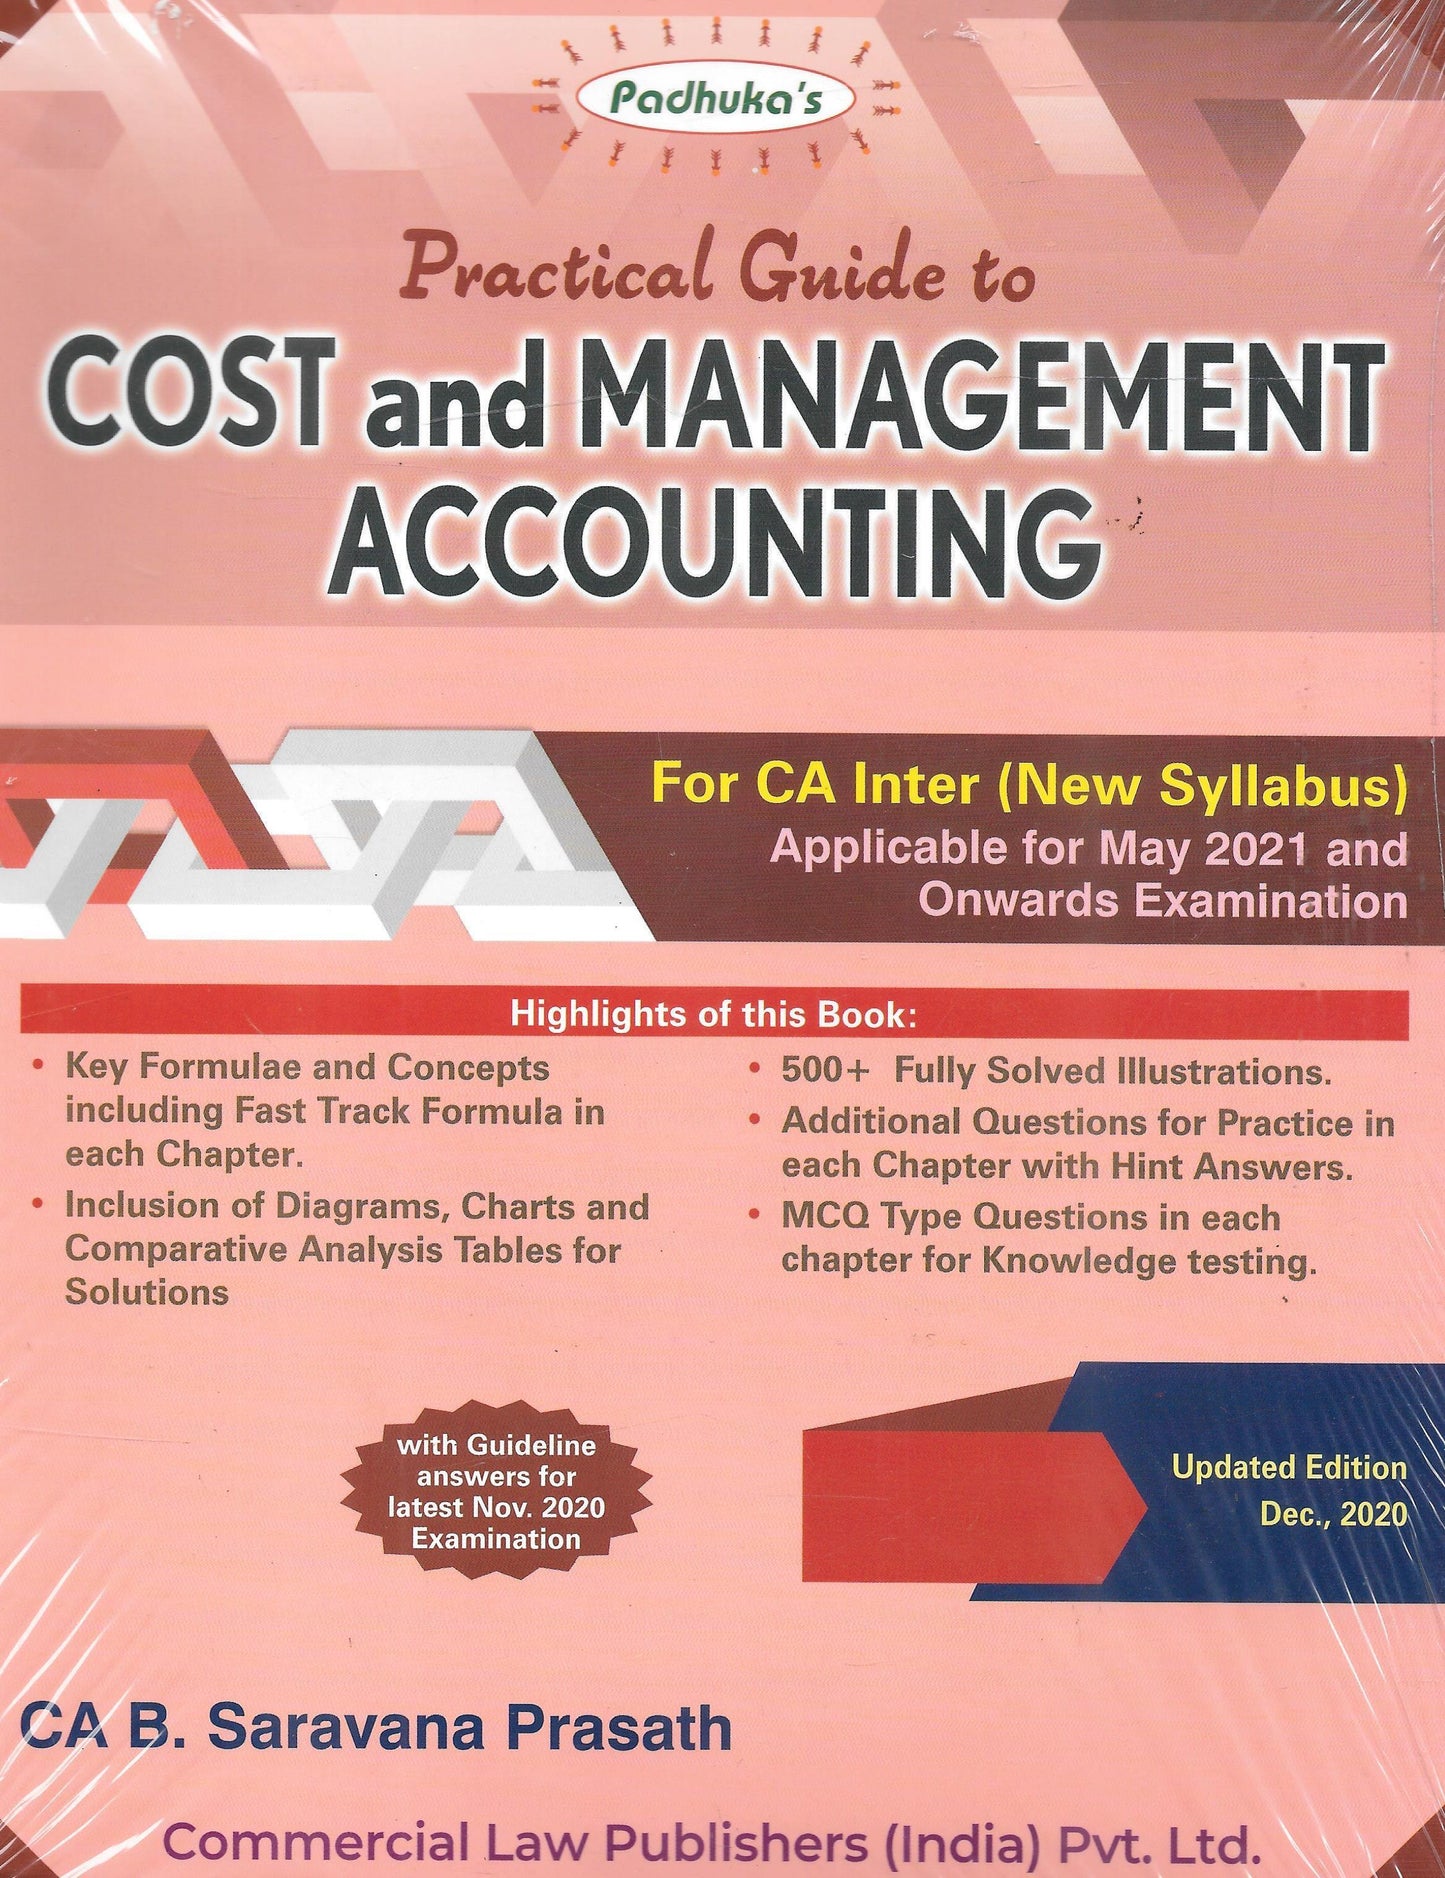 Cost And Management Accounting For CA Inter-New Syllabus - M&J Services